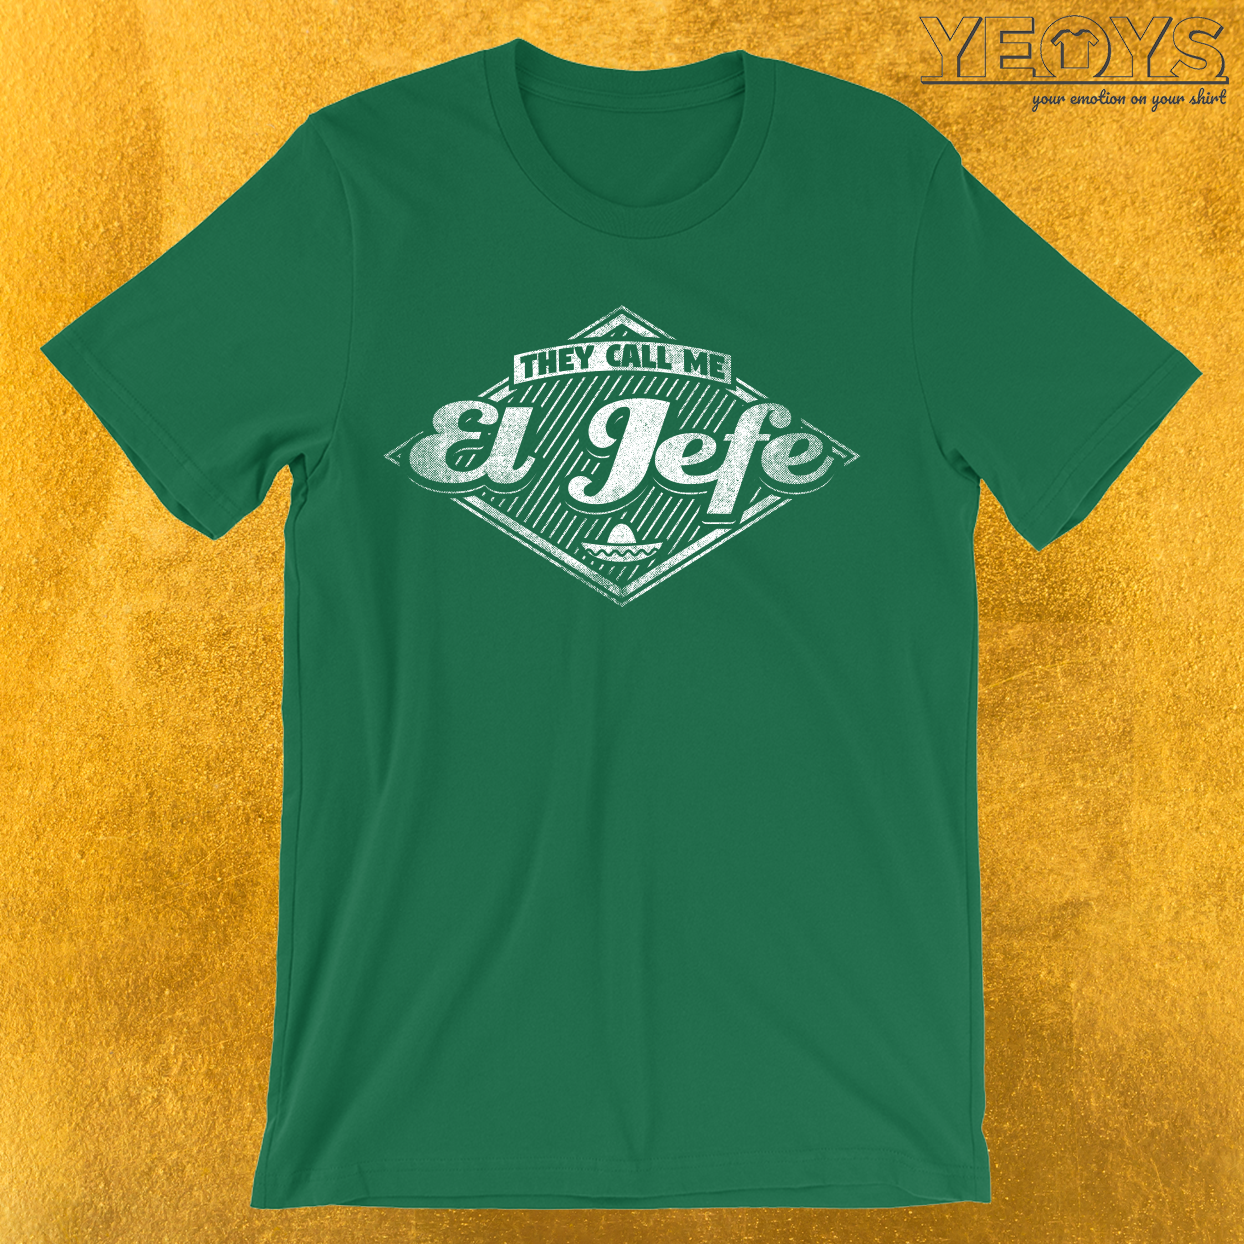 They Call Me El Jefe T-Shirt